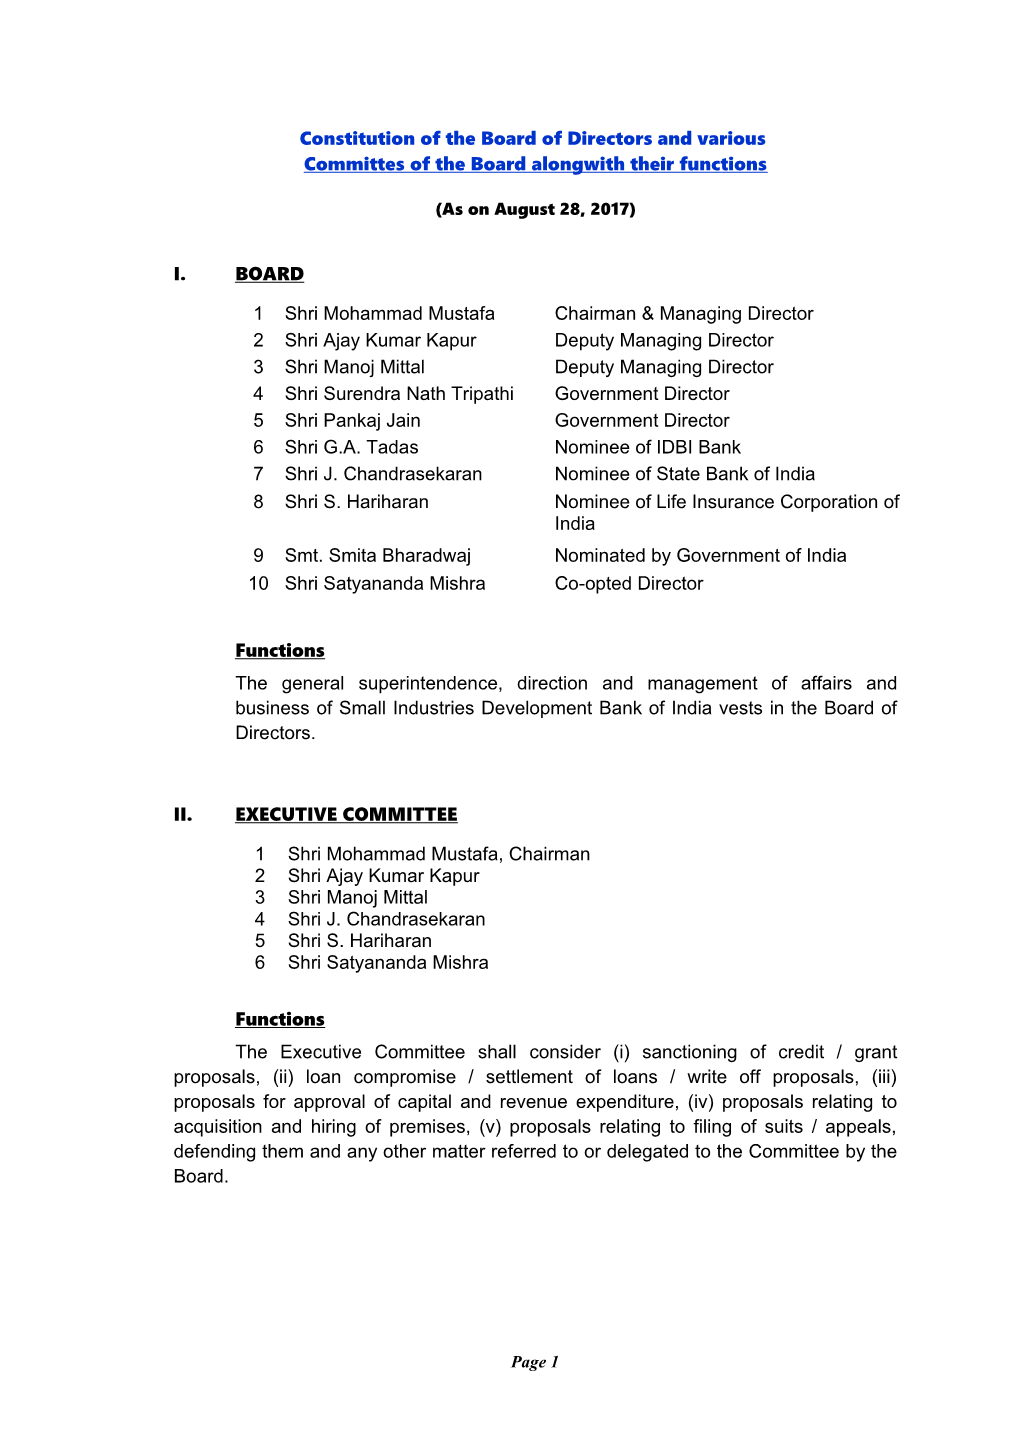 Constitution of the Board of Directors and Various